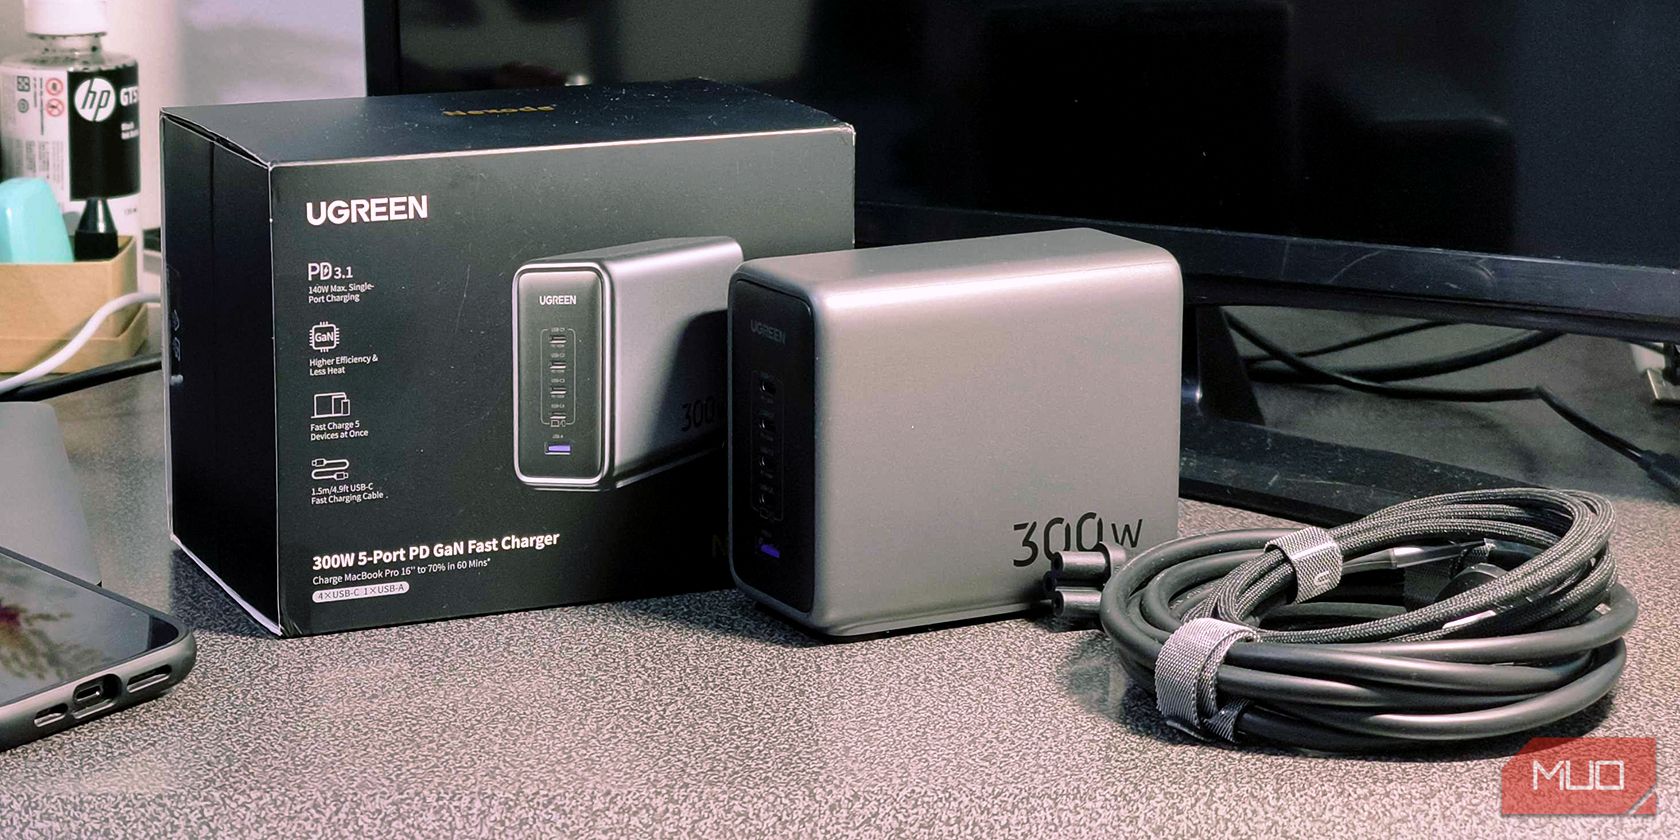 UGREEN Nexode 300W GaN Desktop Charger Review: One Charger to Rule Them All